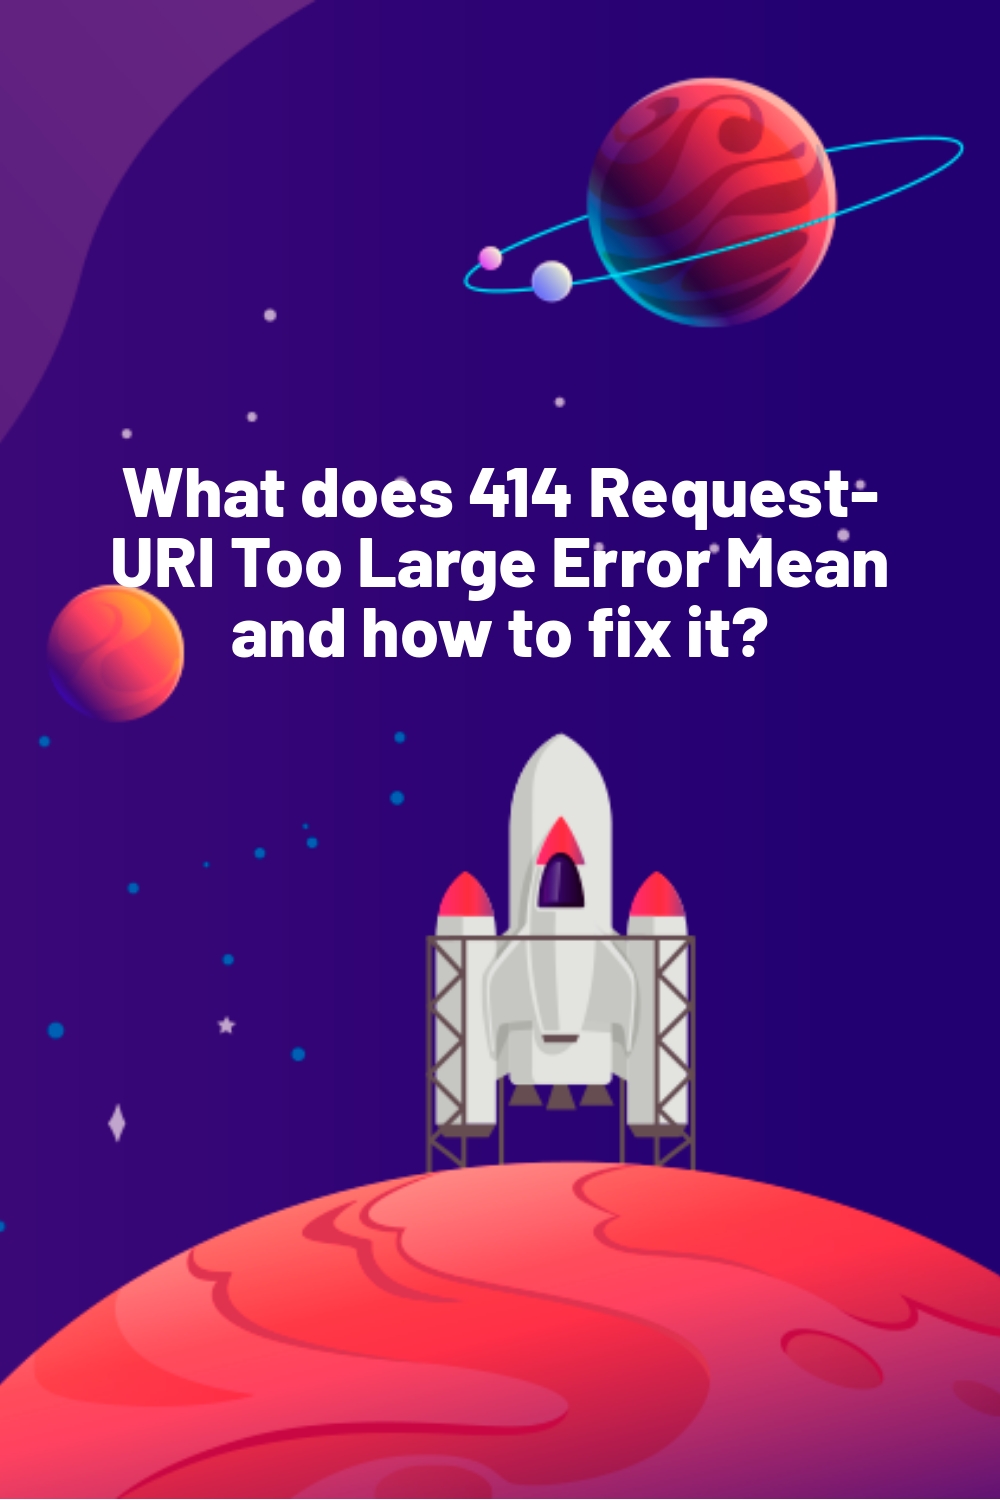 What does 414 Request-URI Too Large Error Mean and how to fix it?